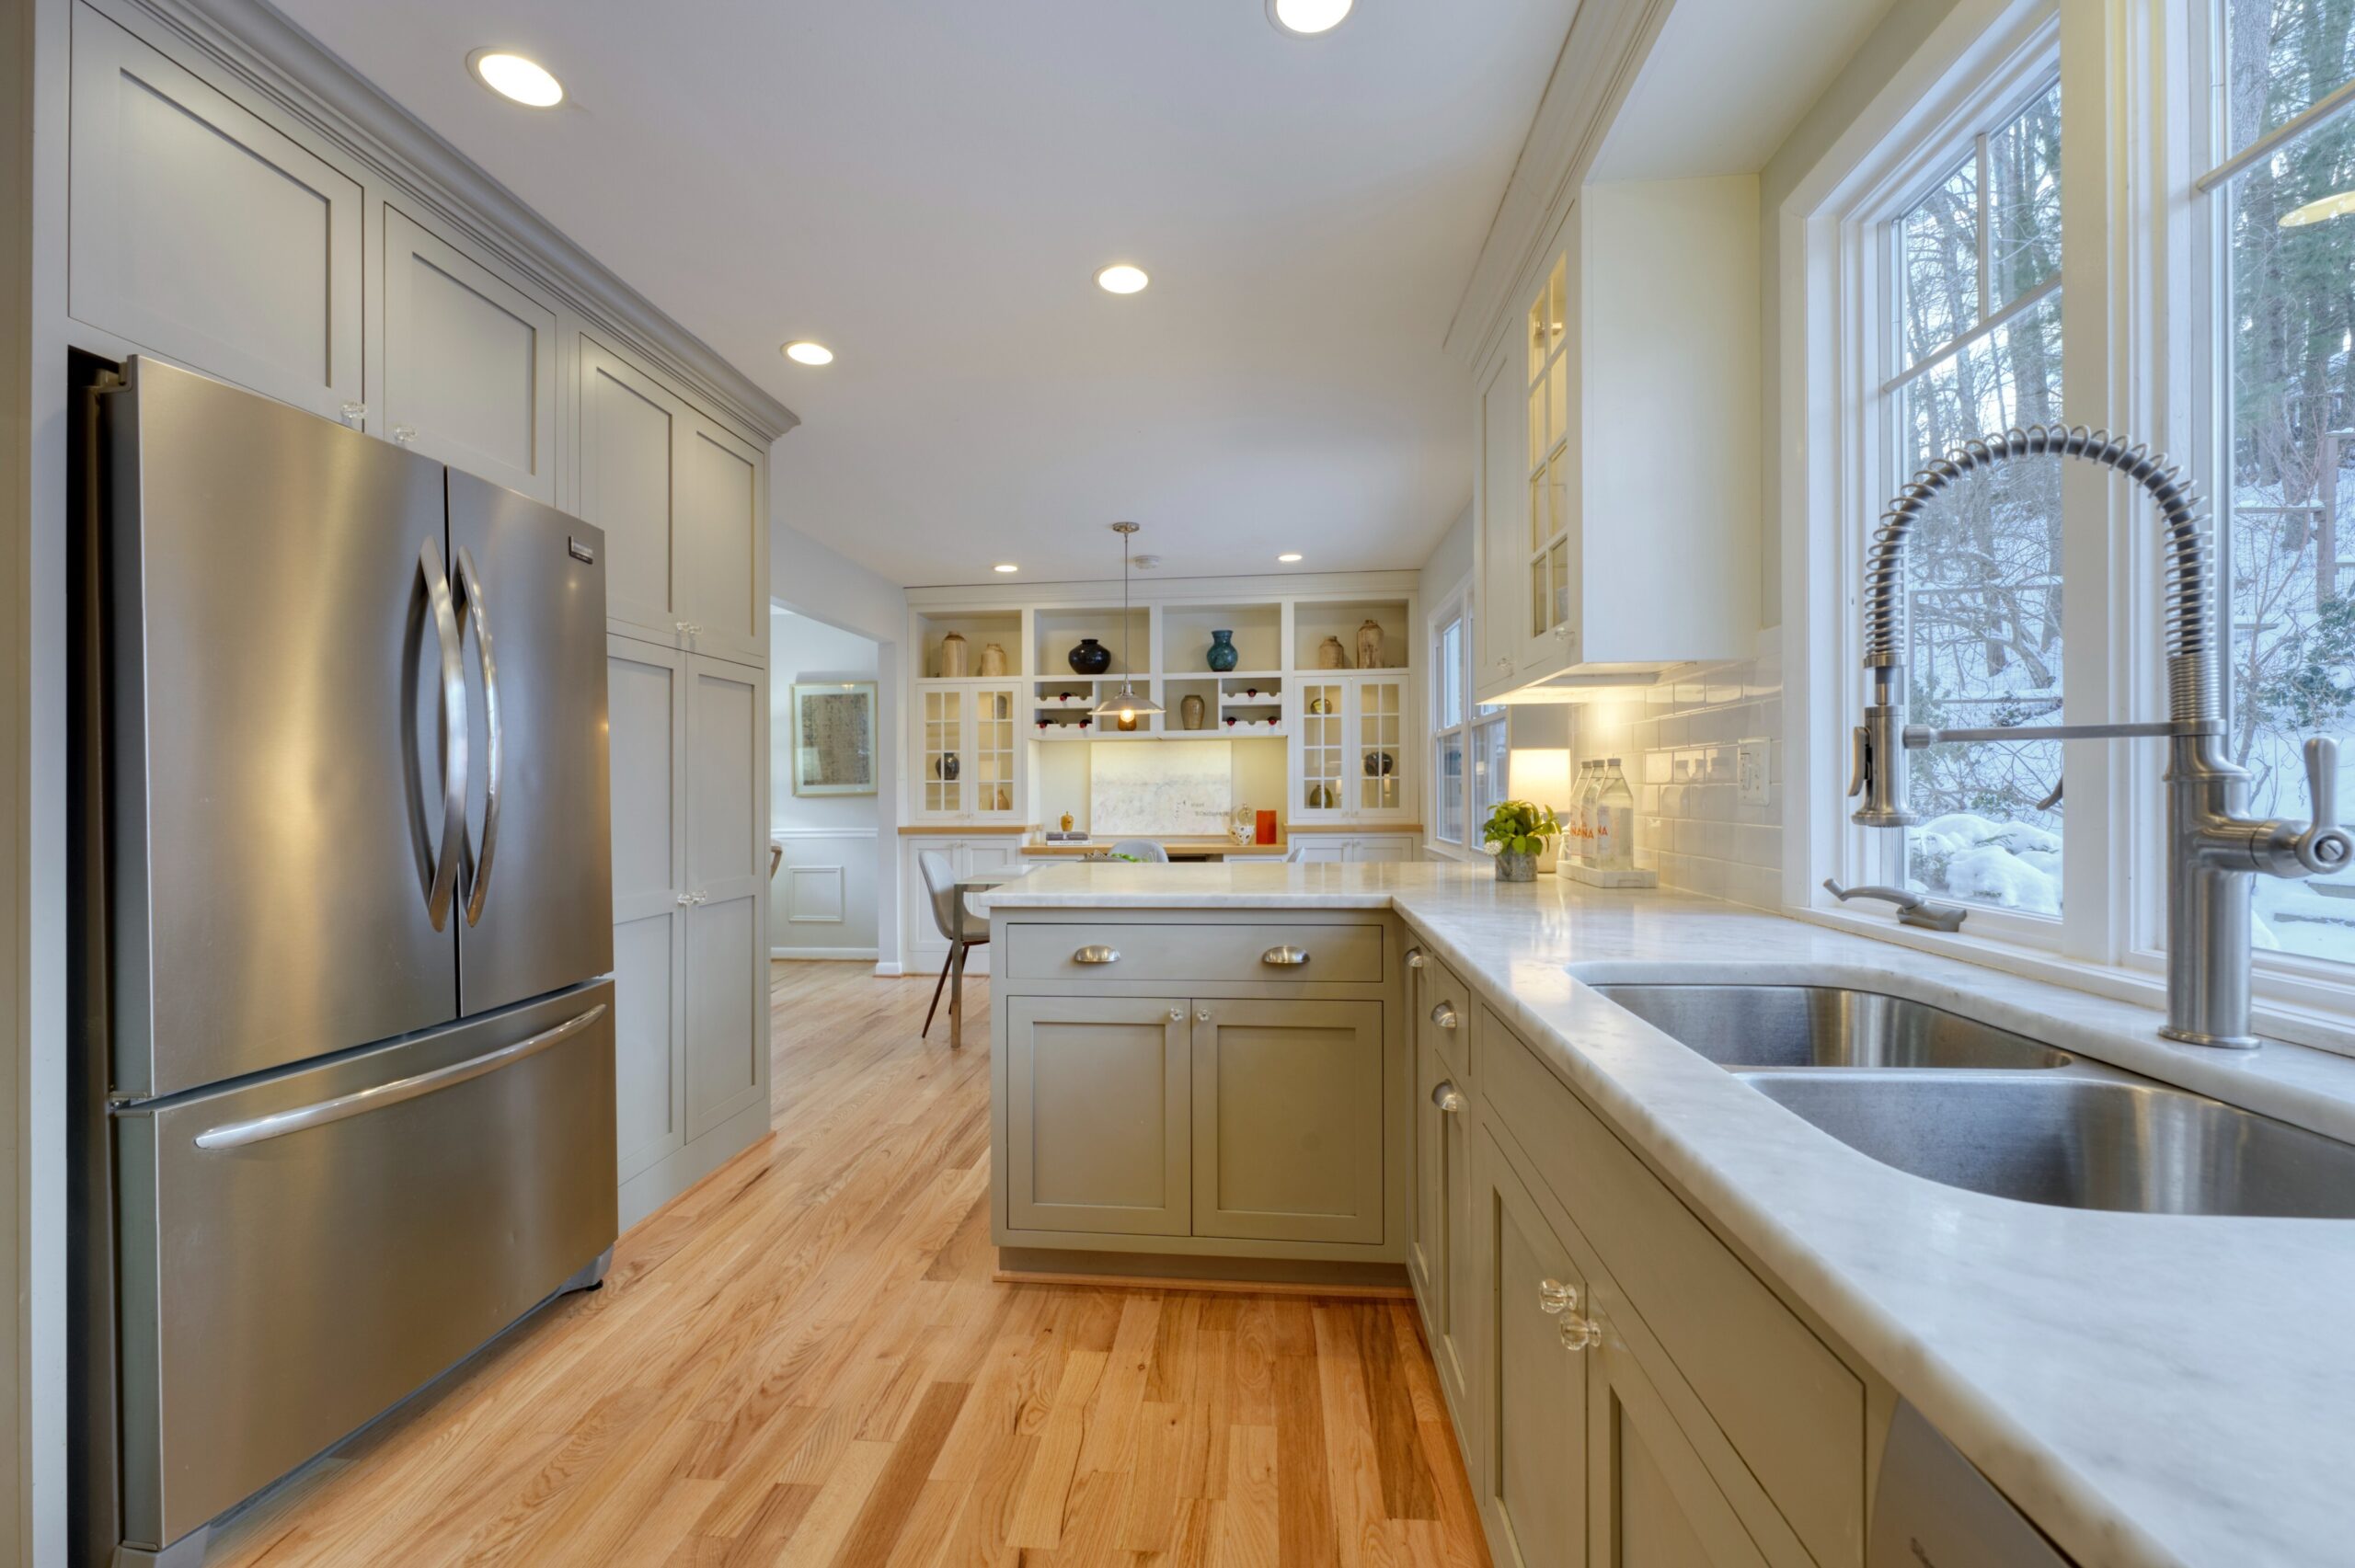 Professional interior photo of 9515 Center St in Vienna, Virginia - showing the kitchen with grey cabinets, stainless appliances and stone counters